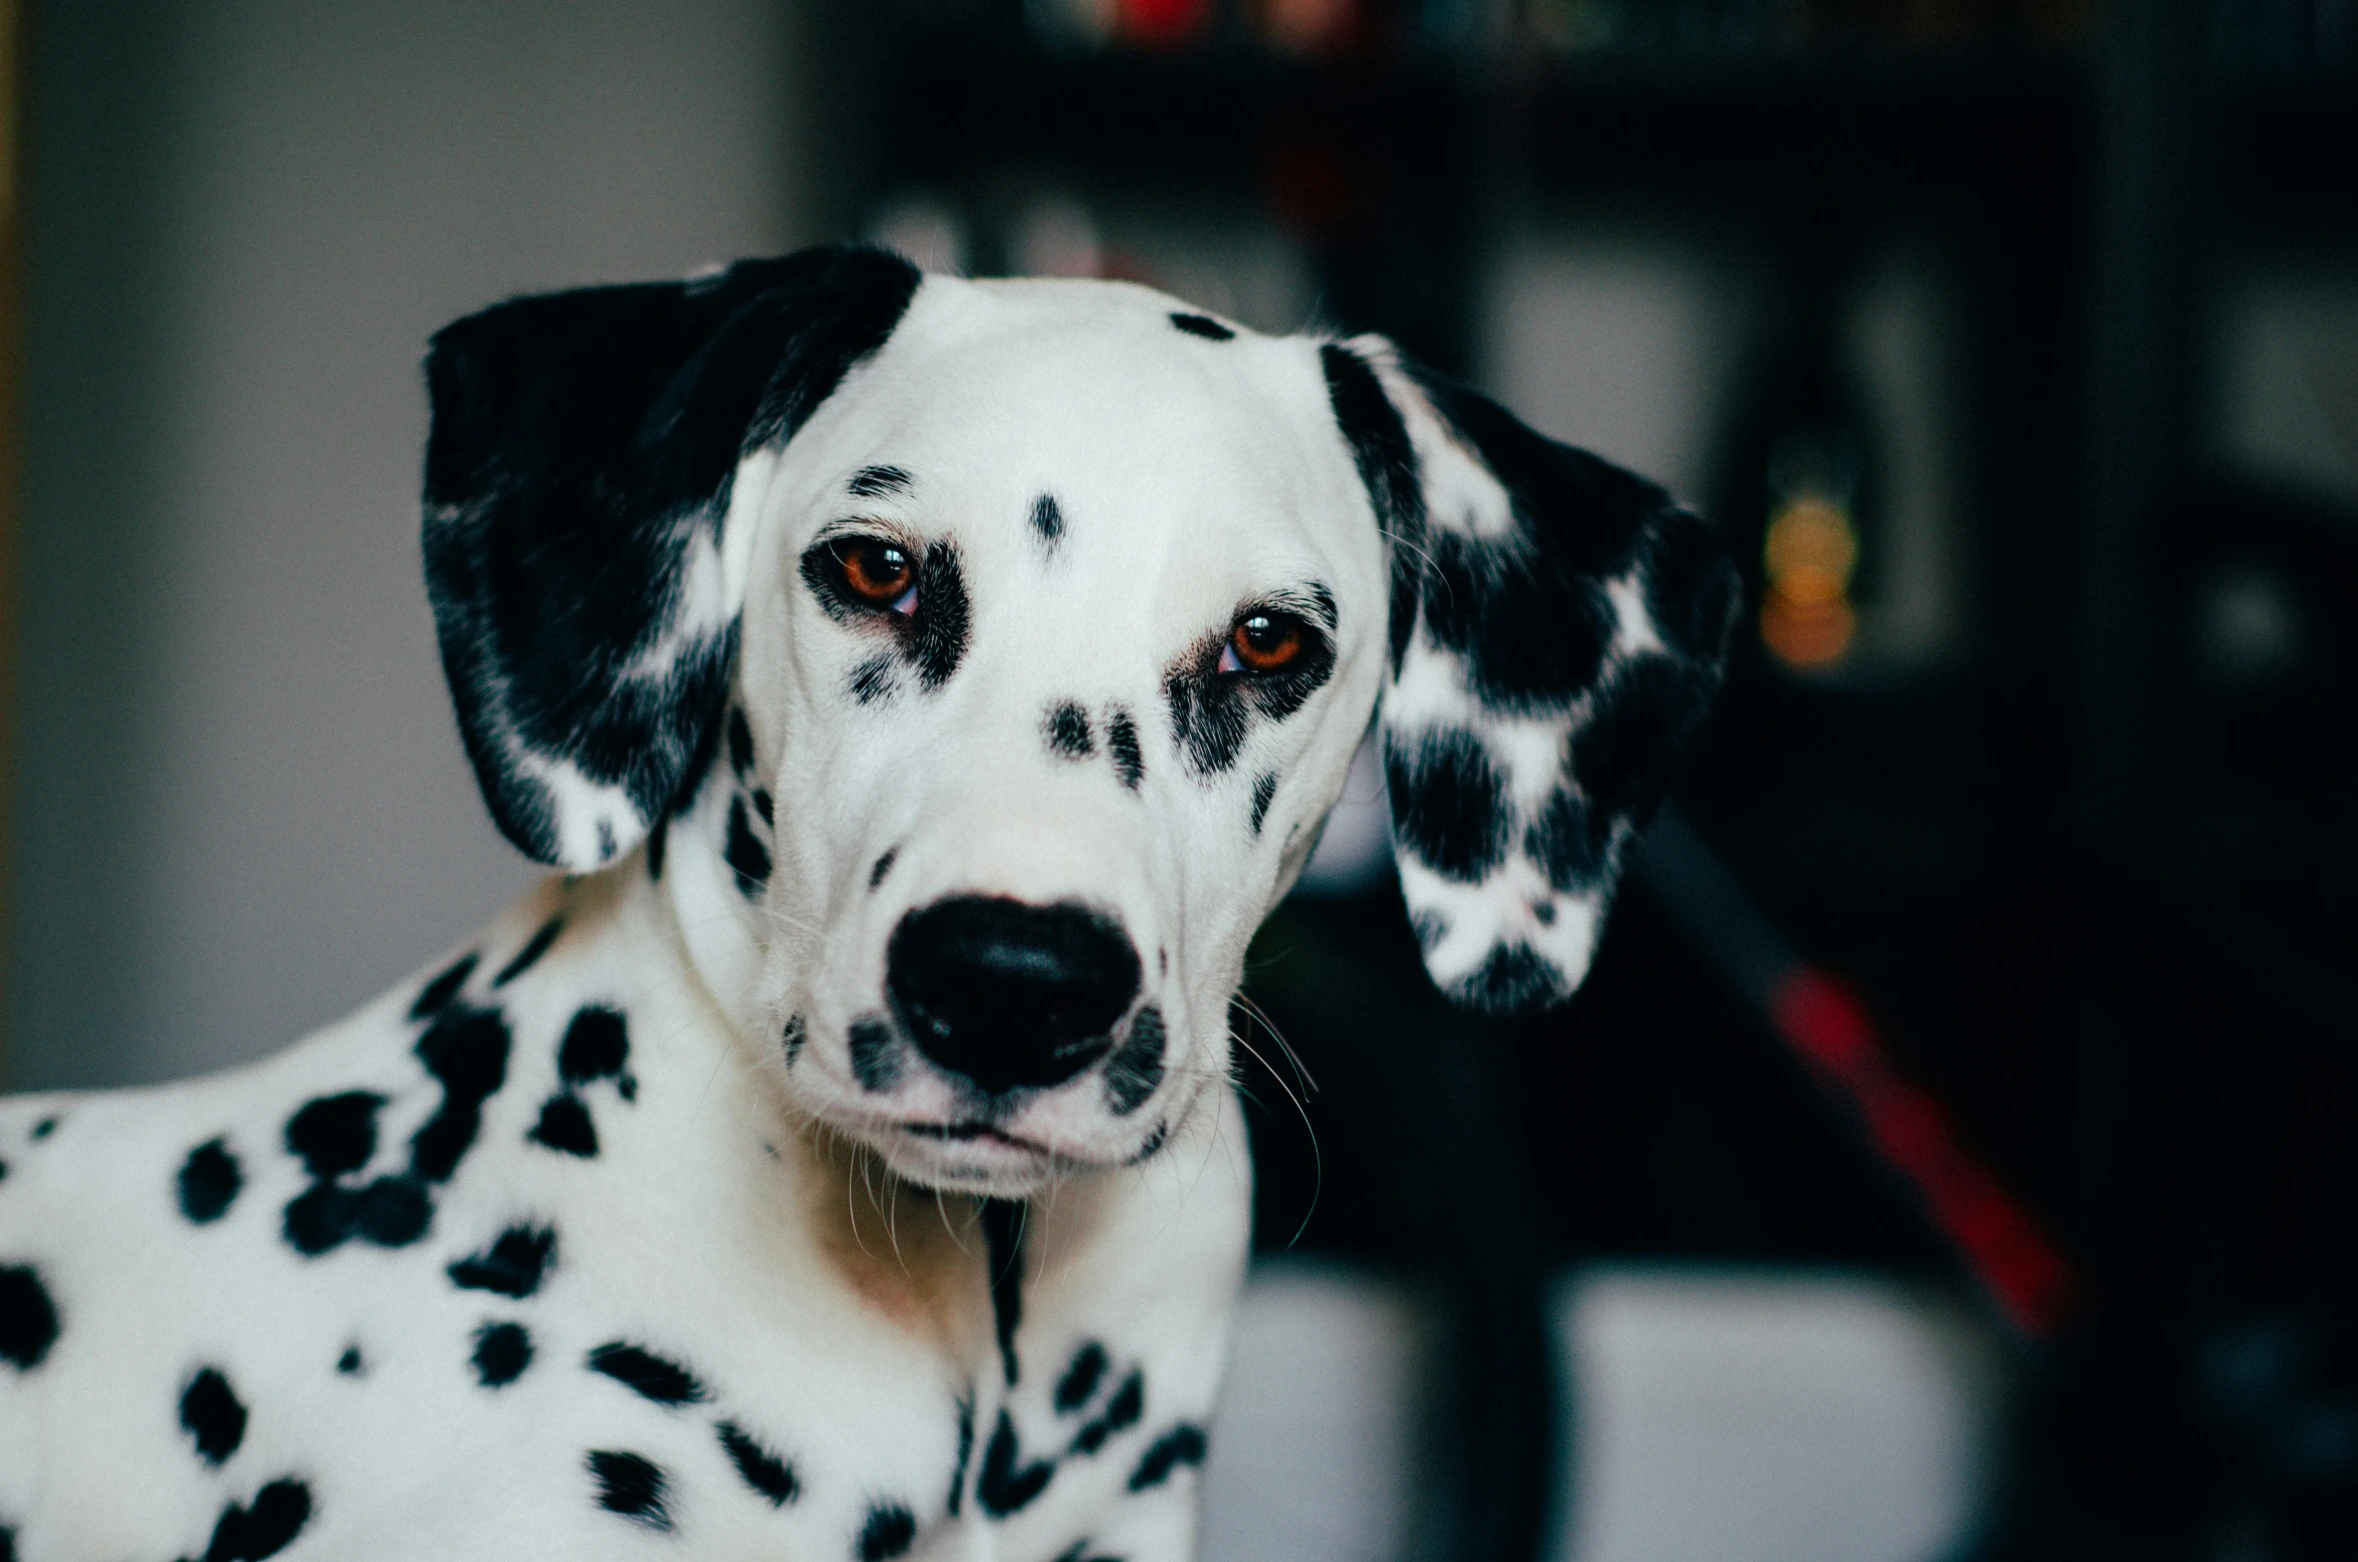 a dalmation dog is shown staring at the camera